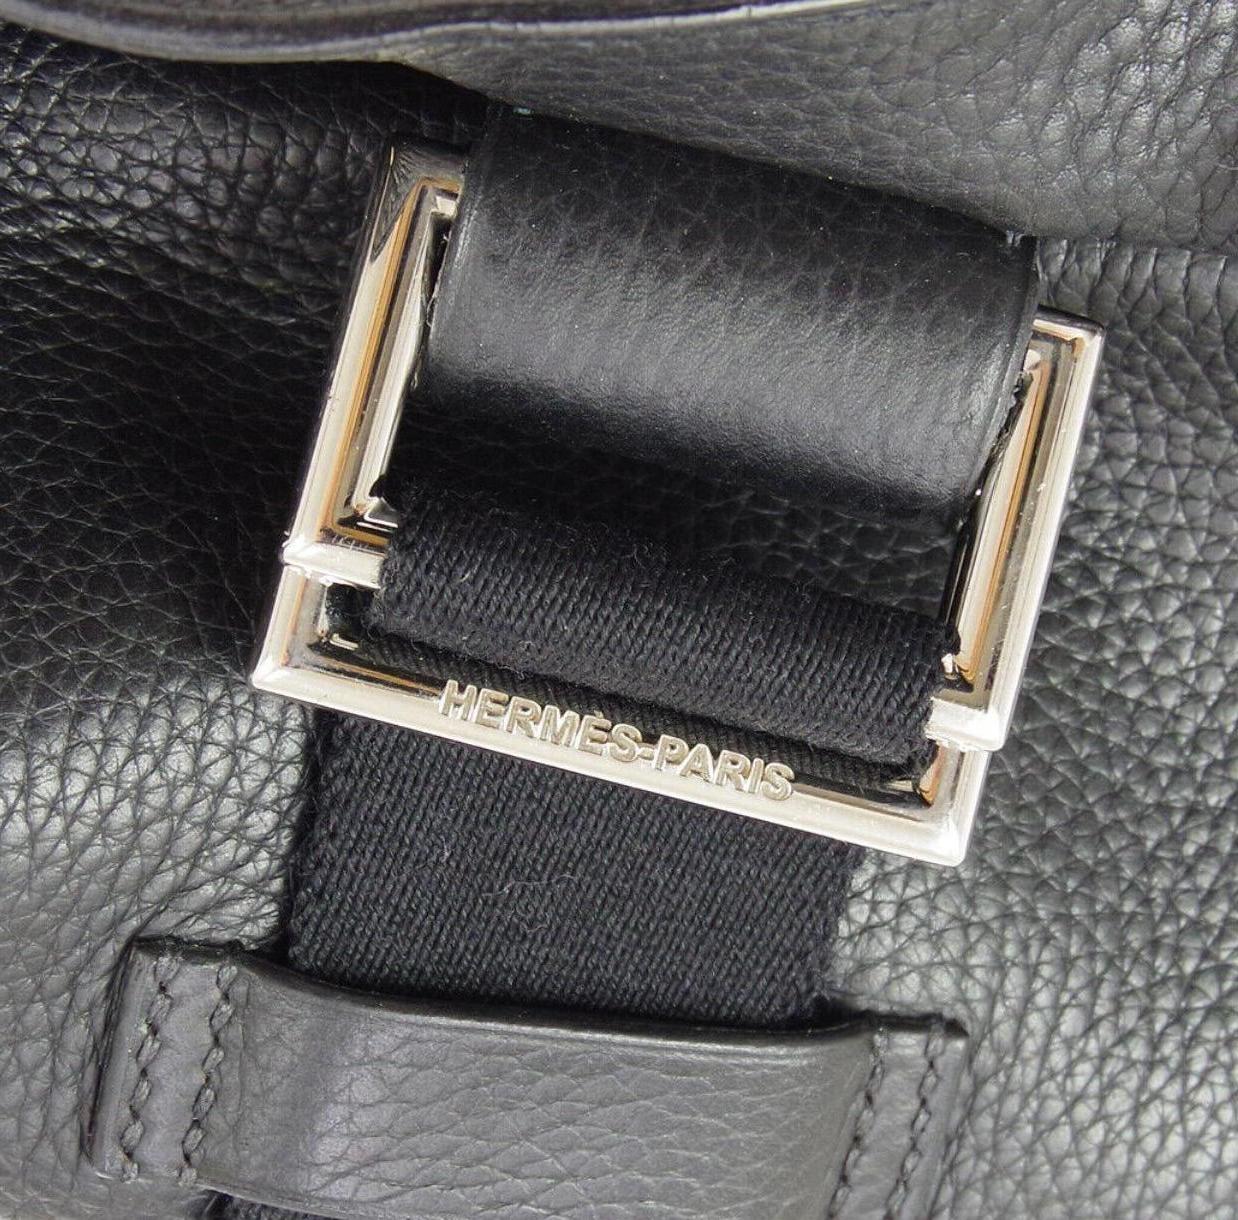 
Leather
Fabric
Silver tone hardware
Leather lining
Date code present
Made in France
Shoulder strap drop 21